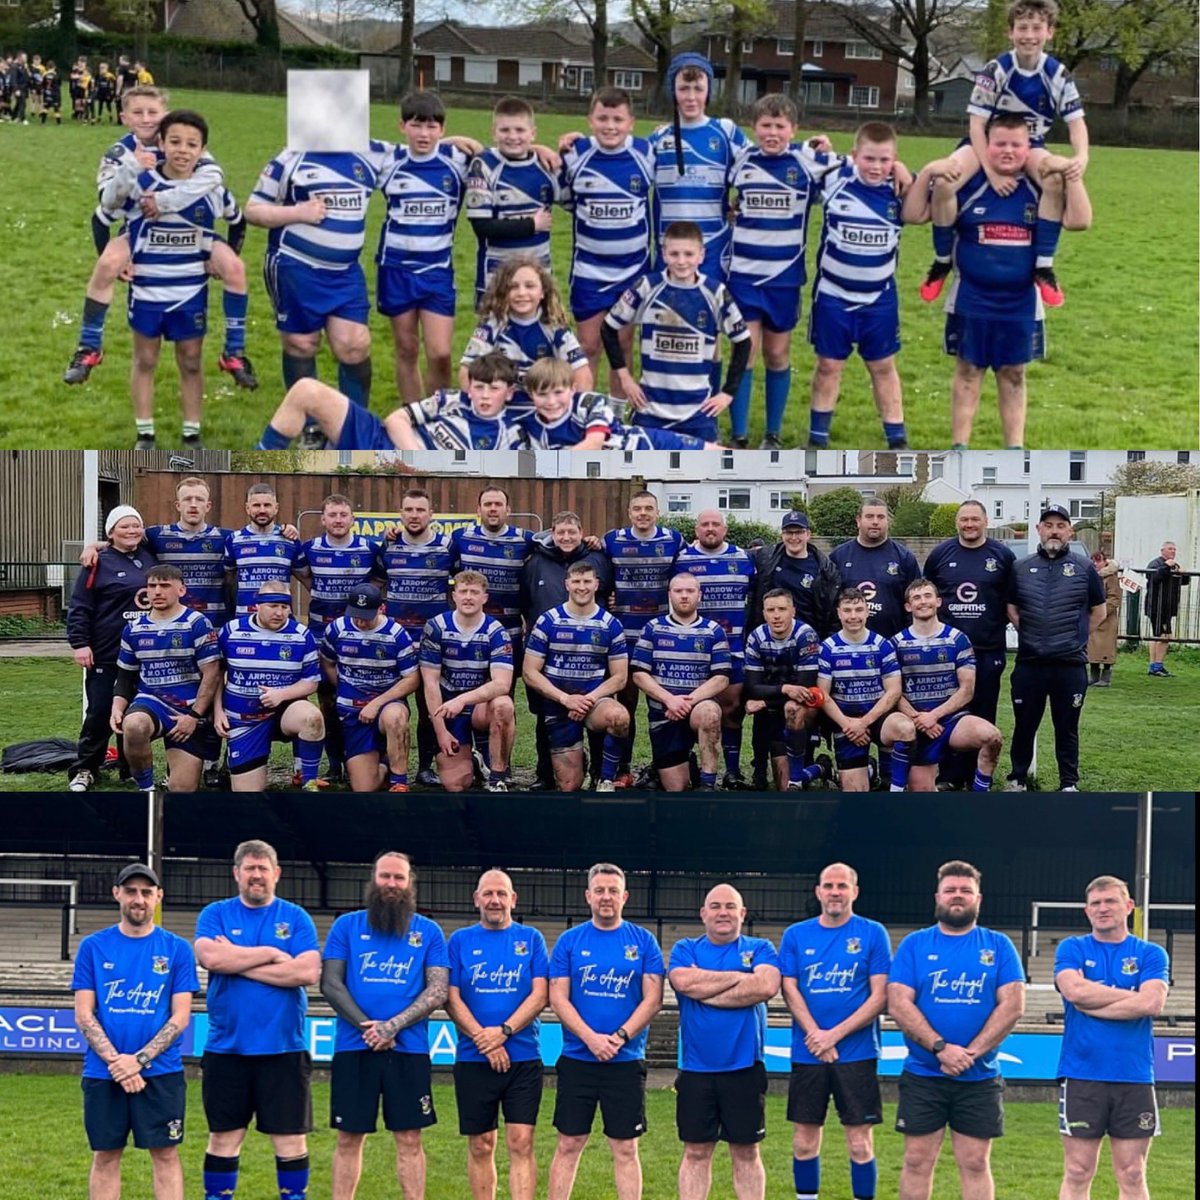 A variety of team photos from weekend. We provide a variation of rugby/groups between the ages of 3 and 83. There is always room in our blue family, feel free to join us. Direct message our social media for more info🔵